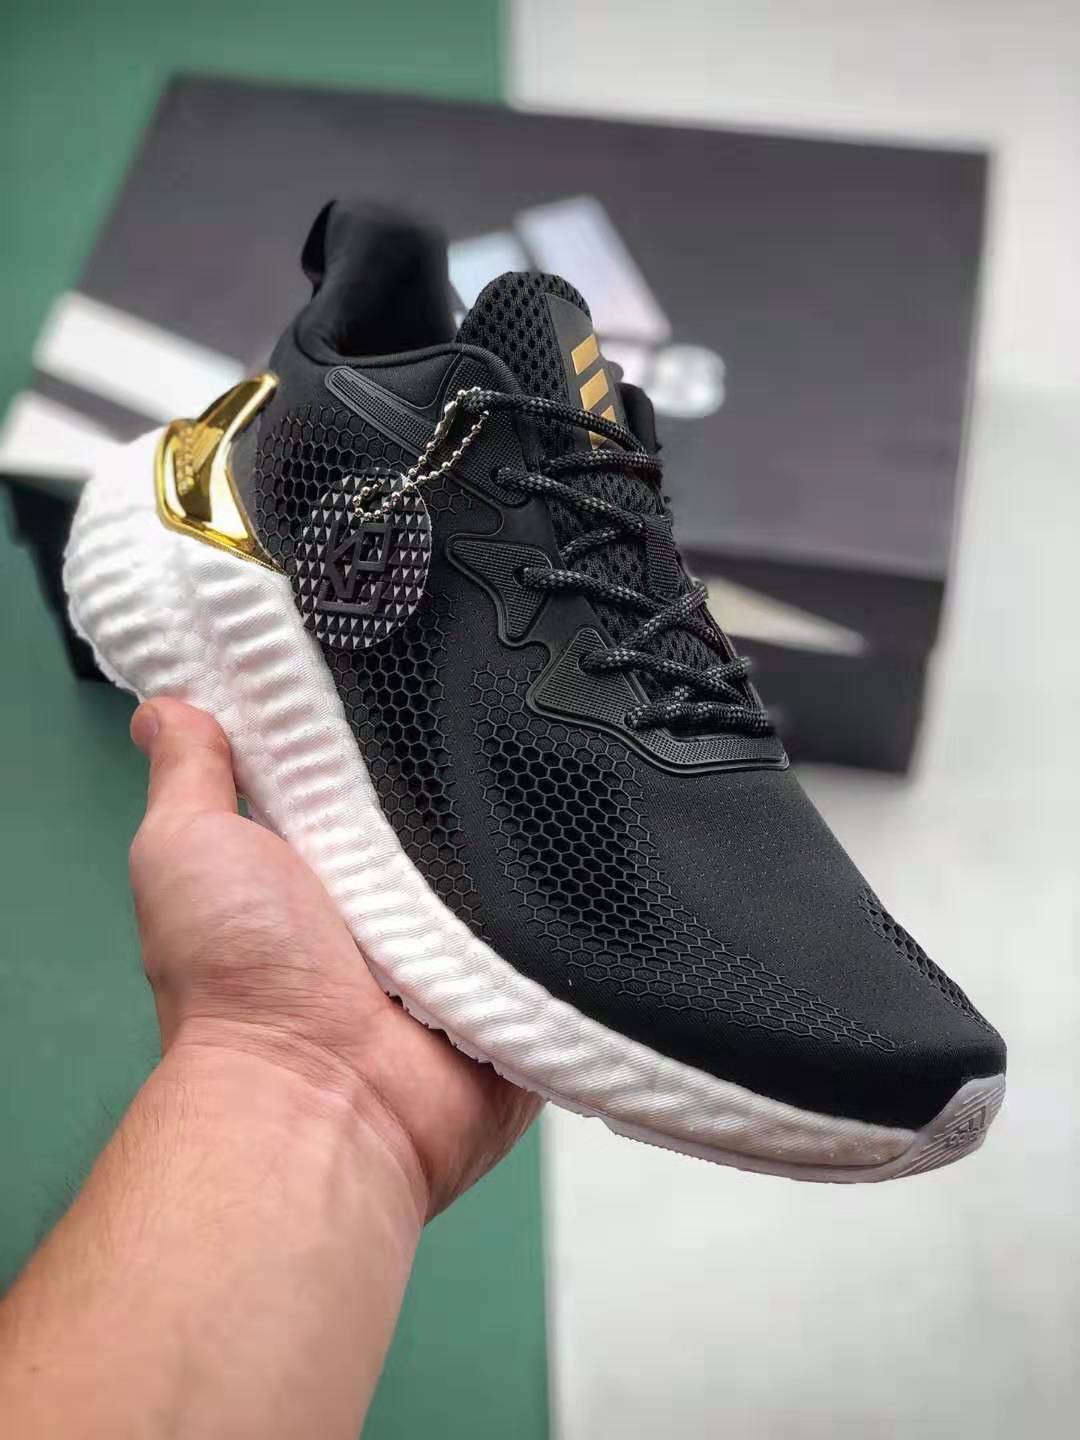 Adidas Alphabounce Boost Core Black Gold White EG6532 - Stylish and Comfortable Footwear